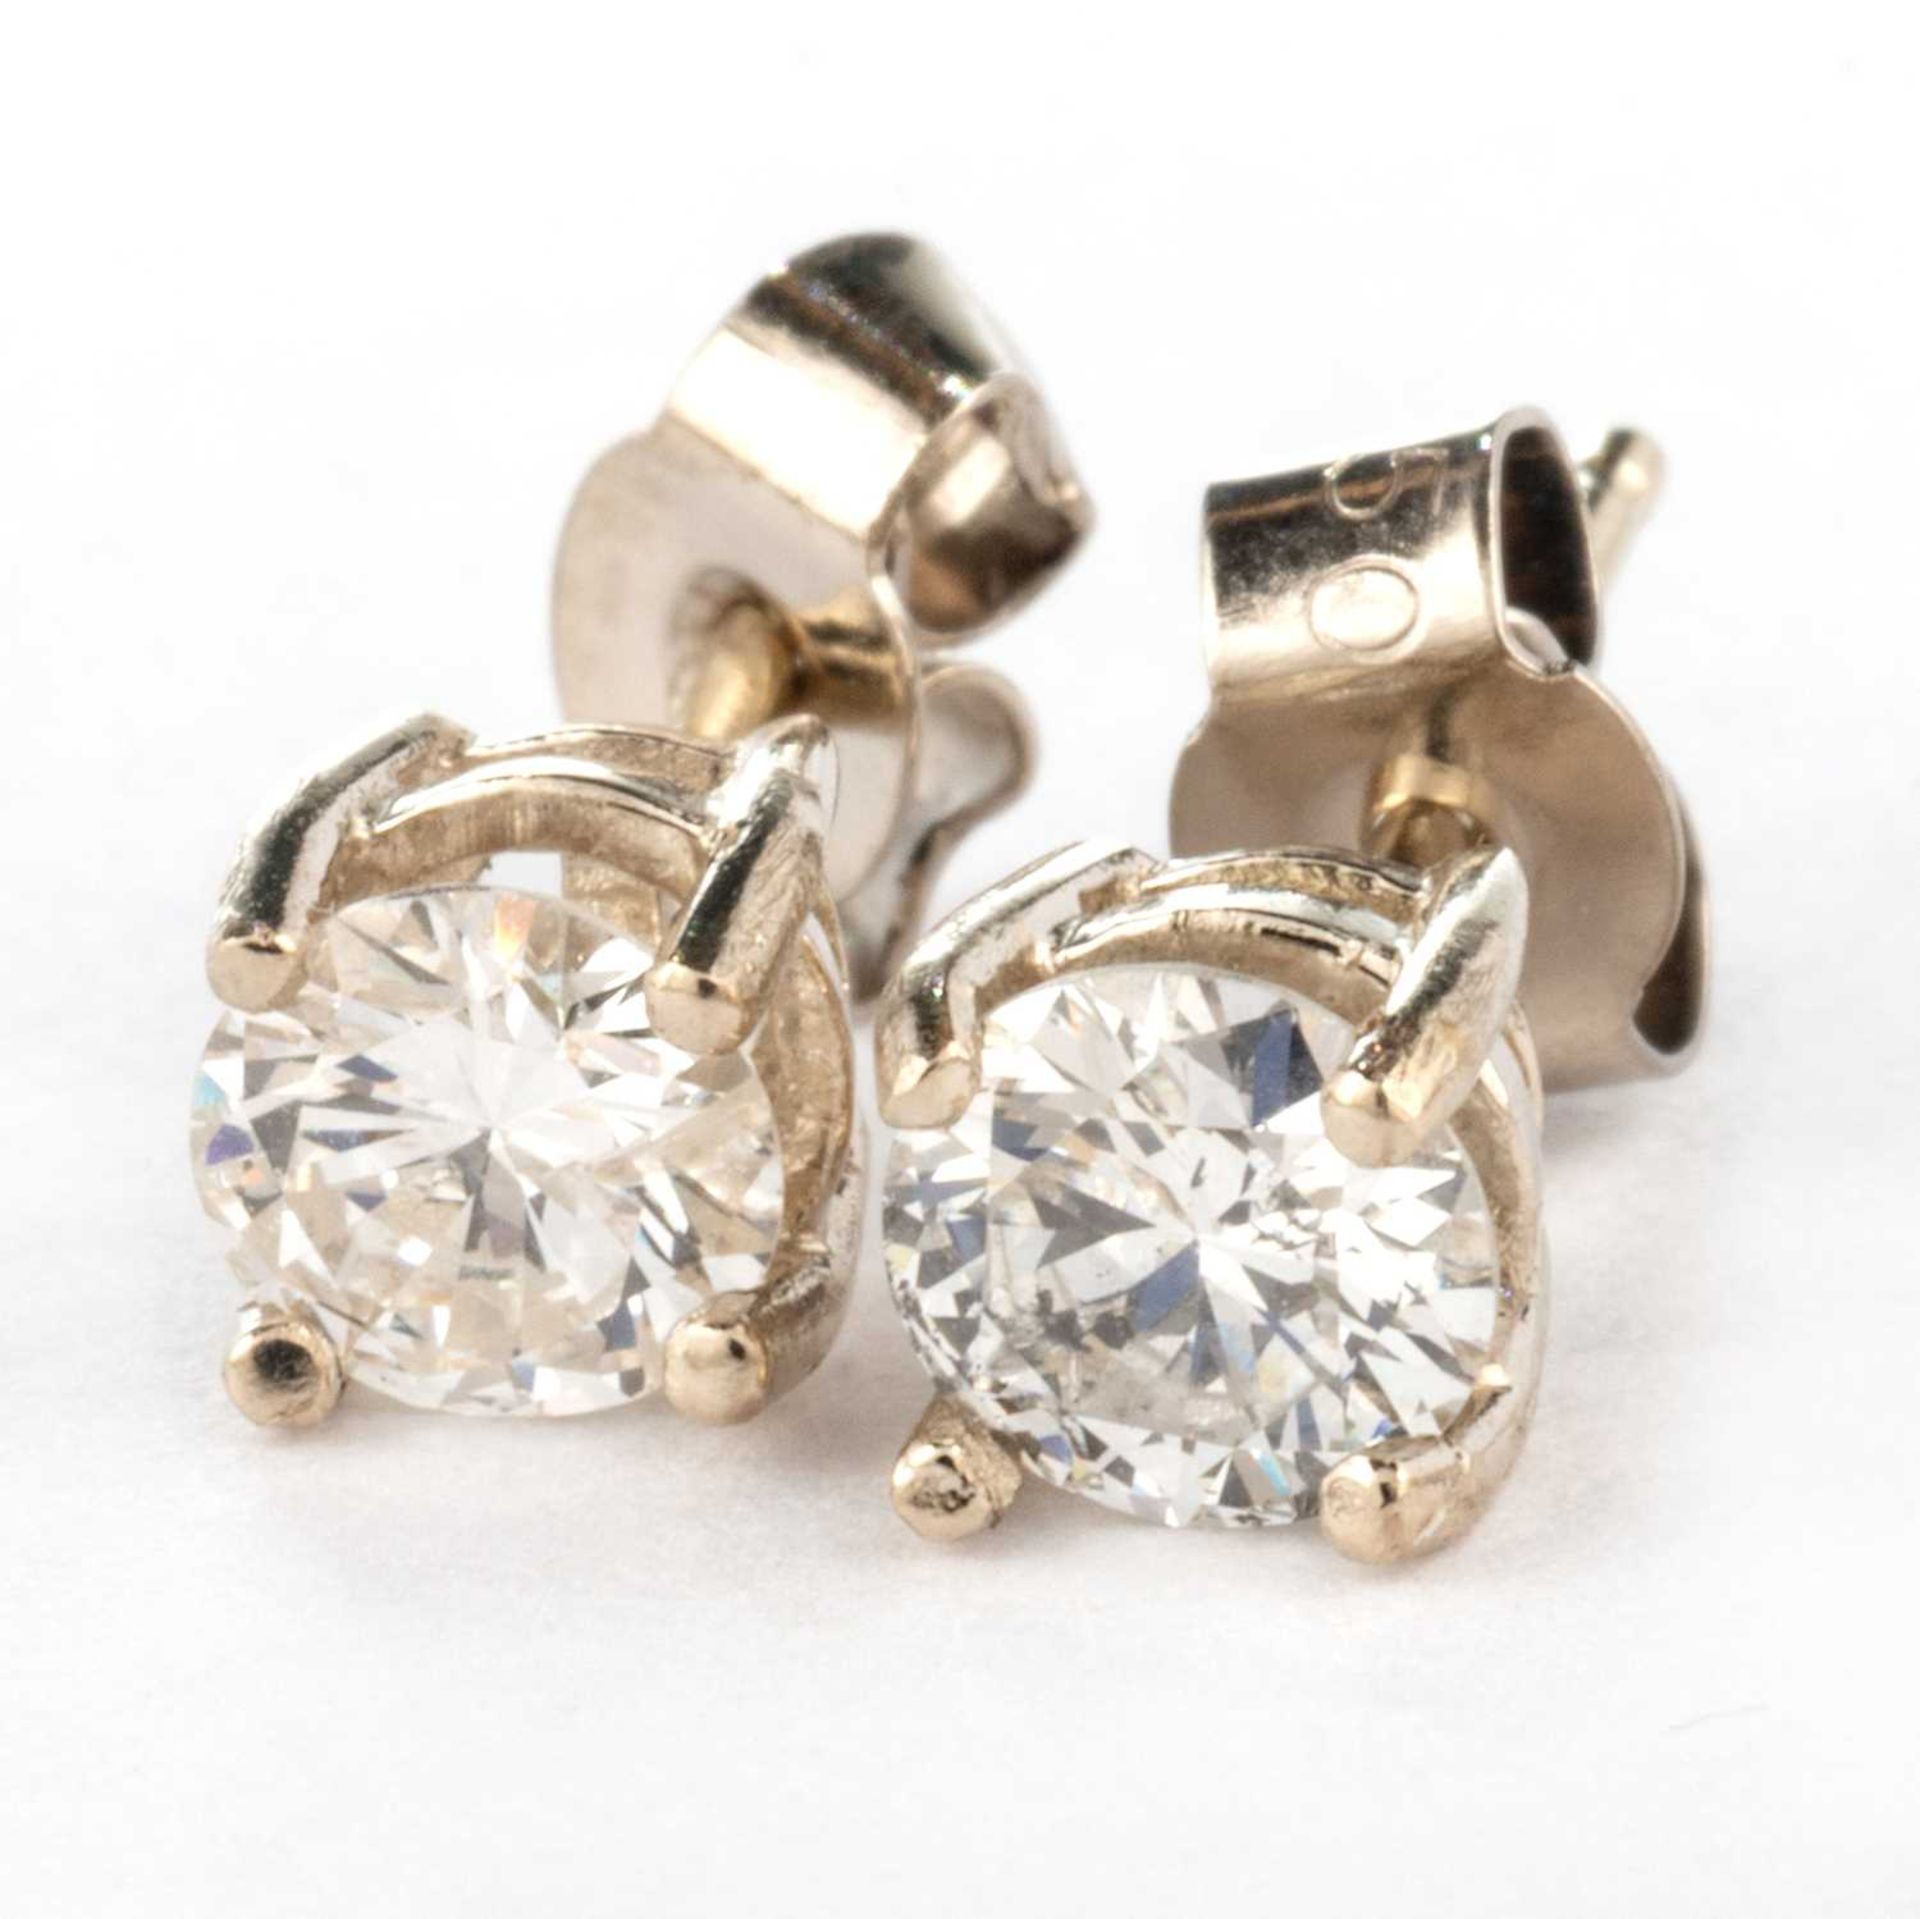 A PAIR OF SOLITAIRE DIAMOND EARRINGS - Image 3 of 3